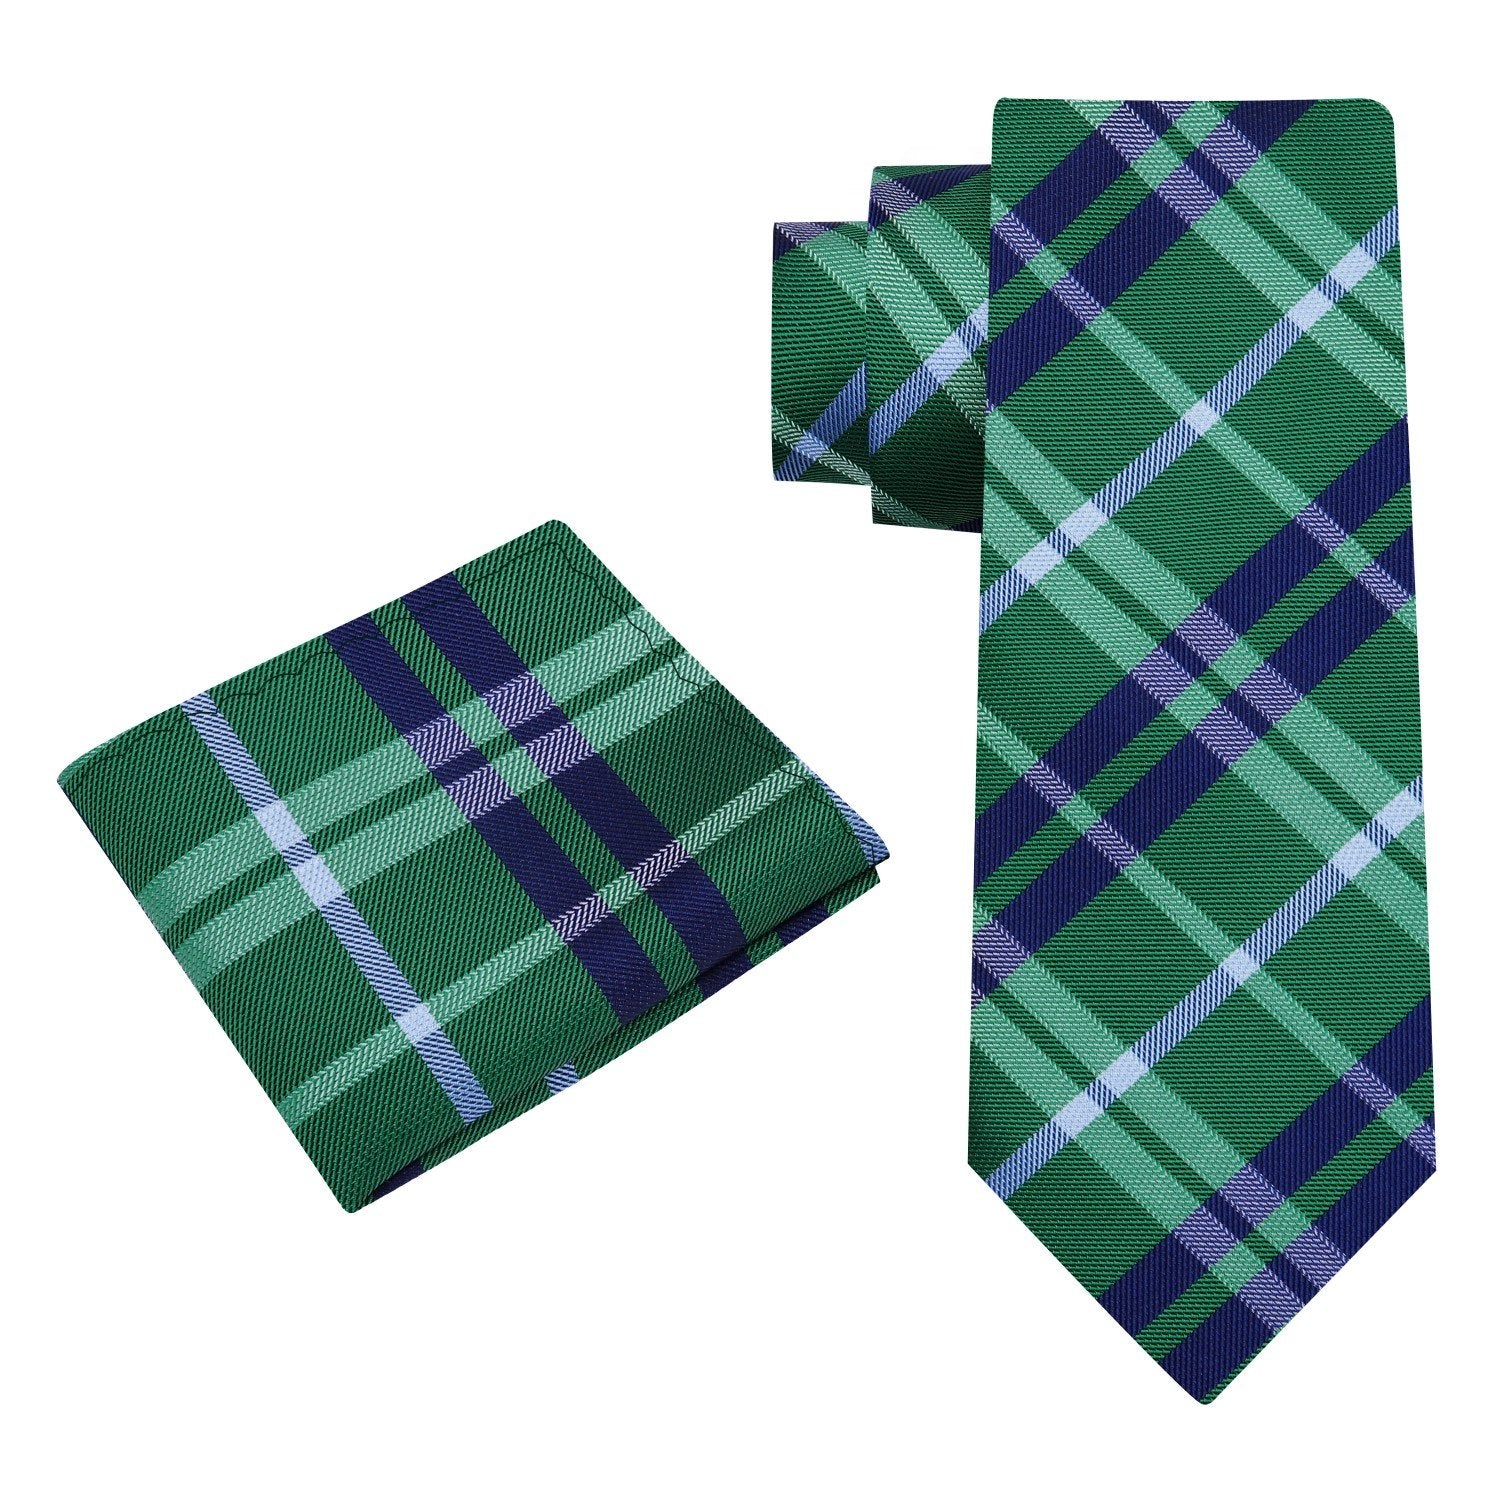 Alt View: Green, Blue Plaid Tie and Square